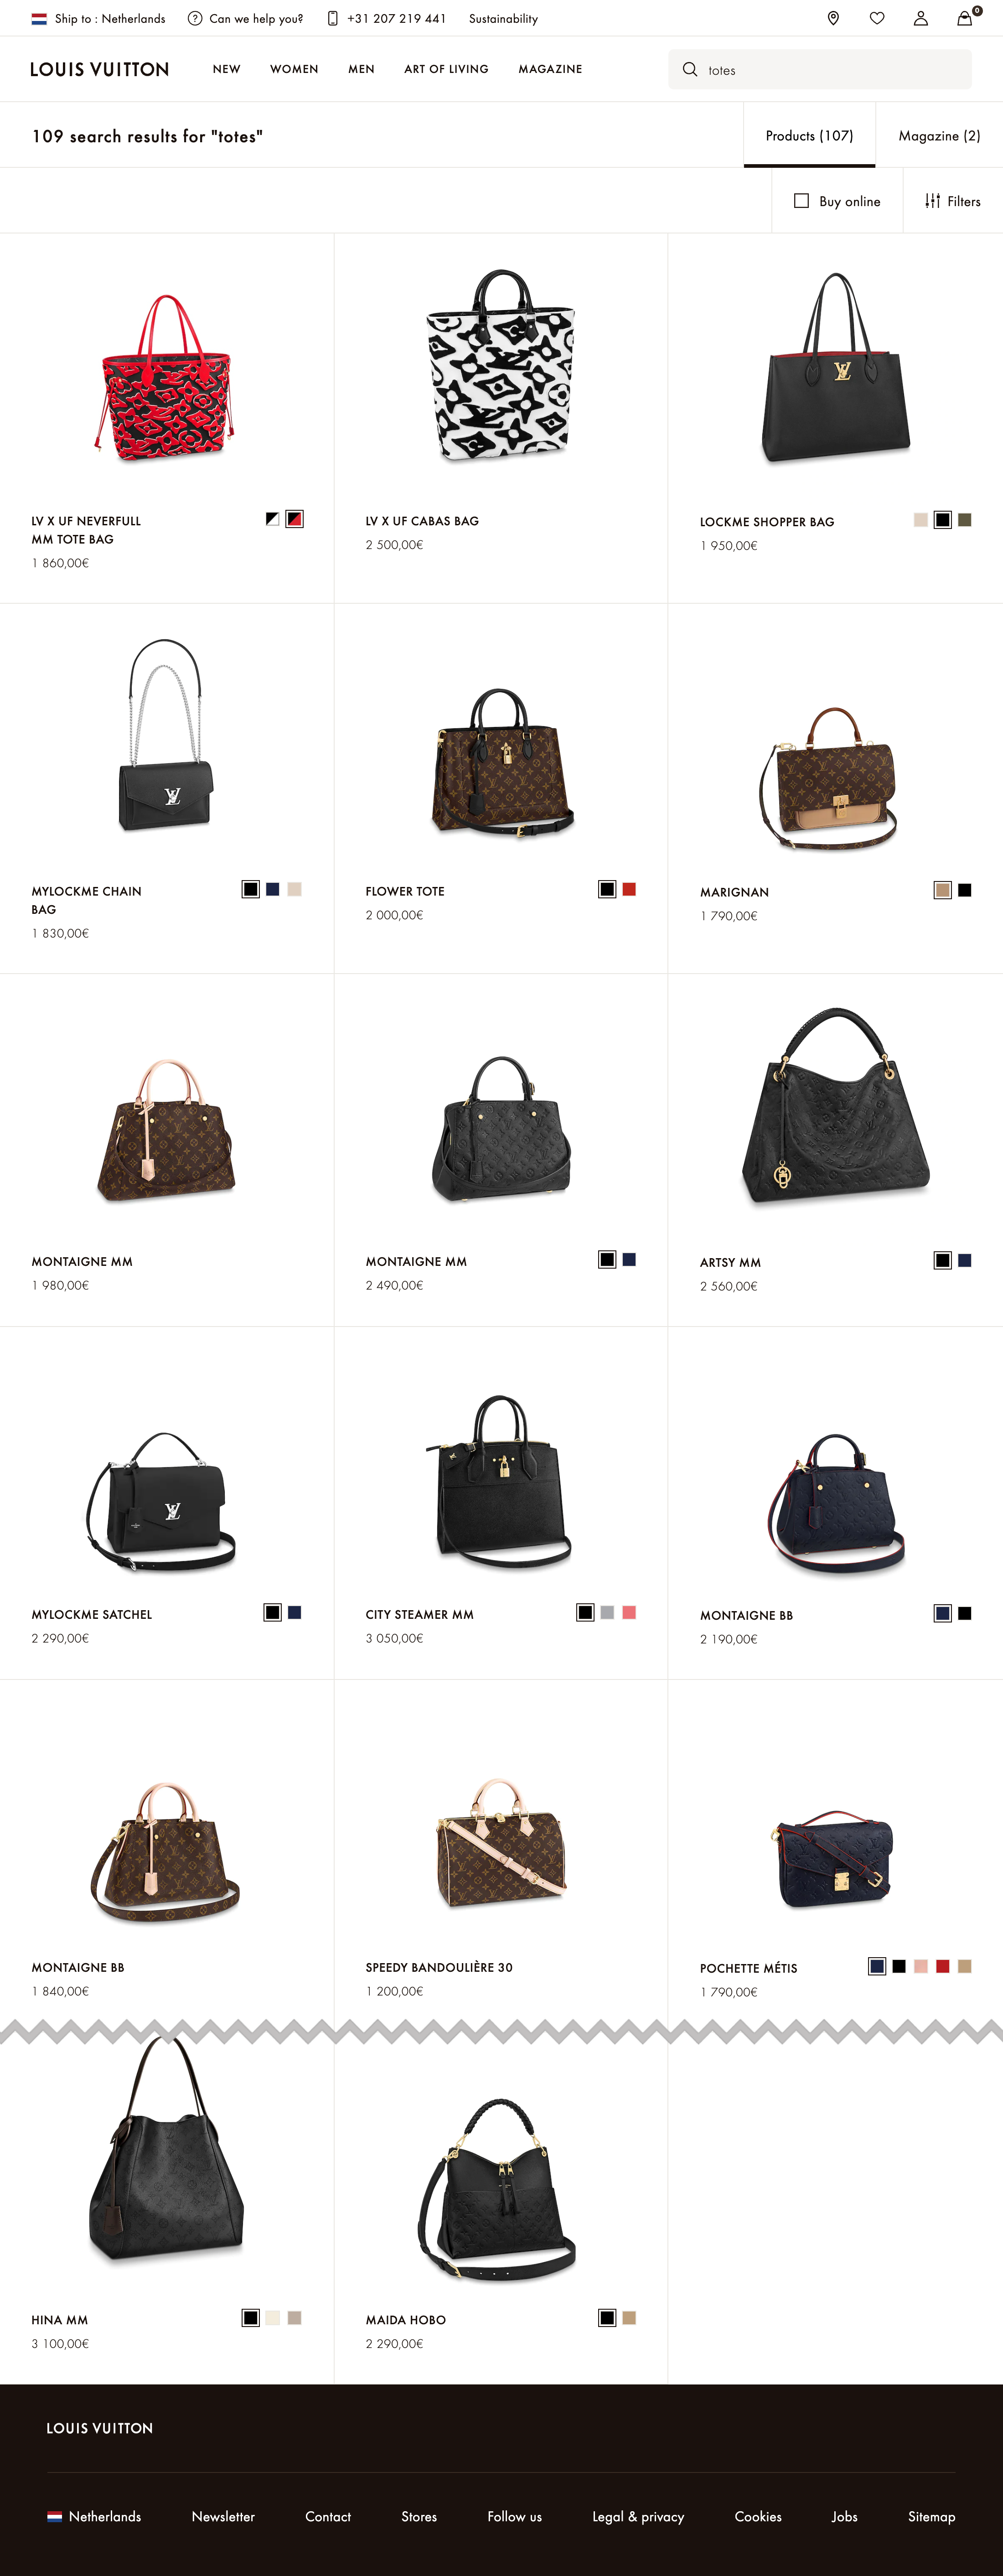 Louis Vuitton's Search Results Page – 410 of 870 Search Results